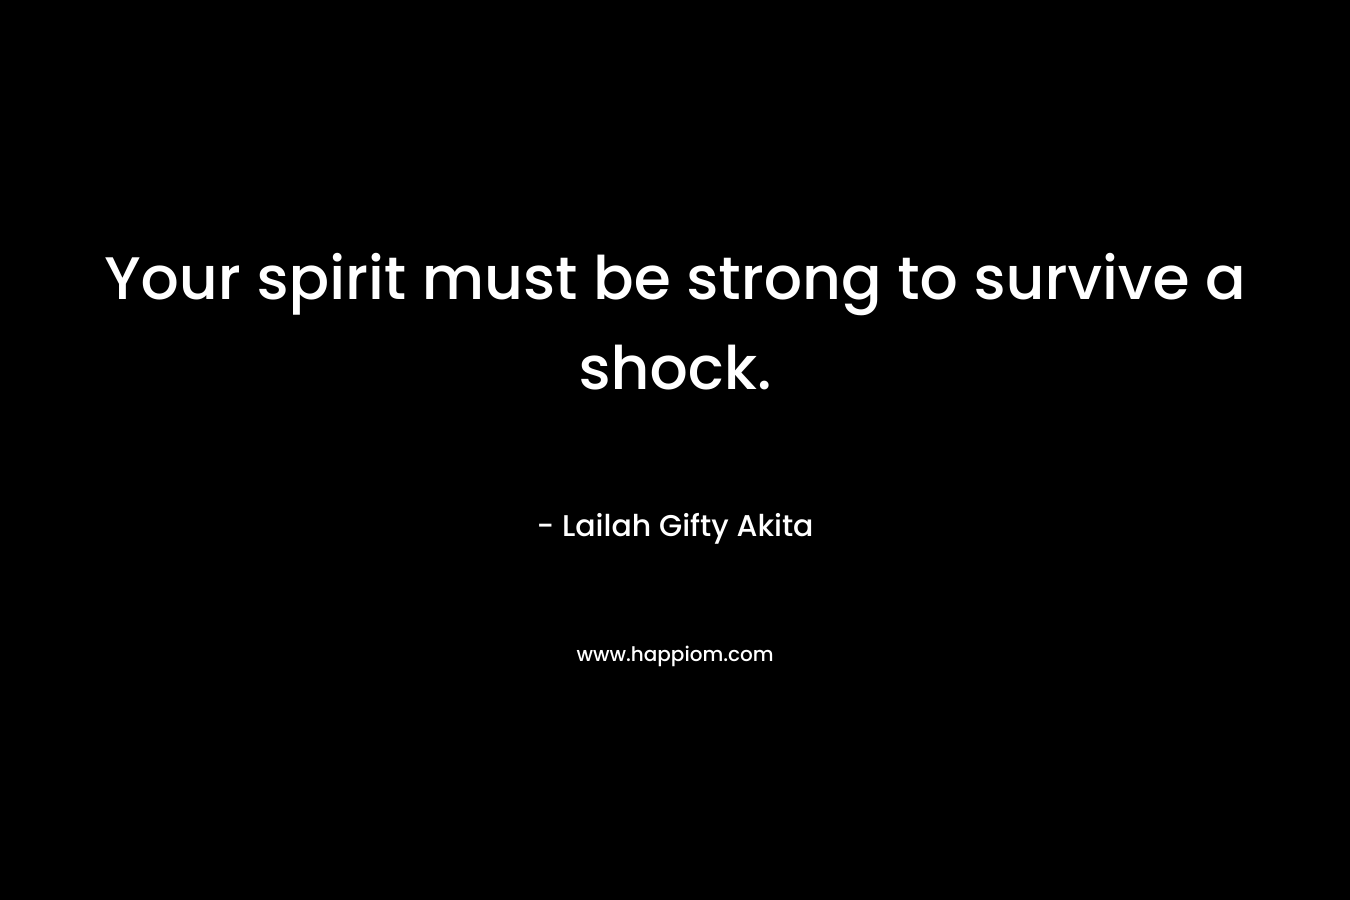 Your spirit must be strong to survive a shock. – Lailah Gifty Akita